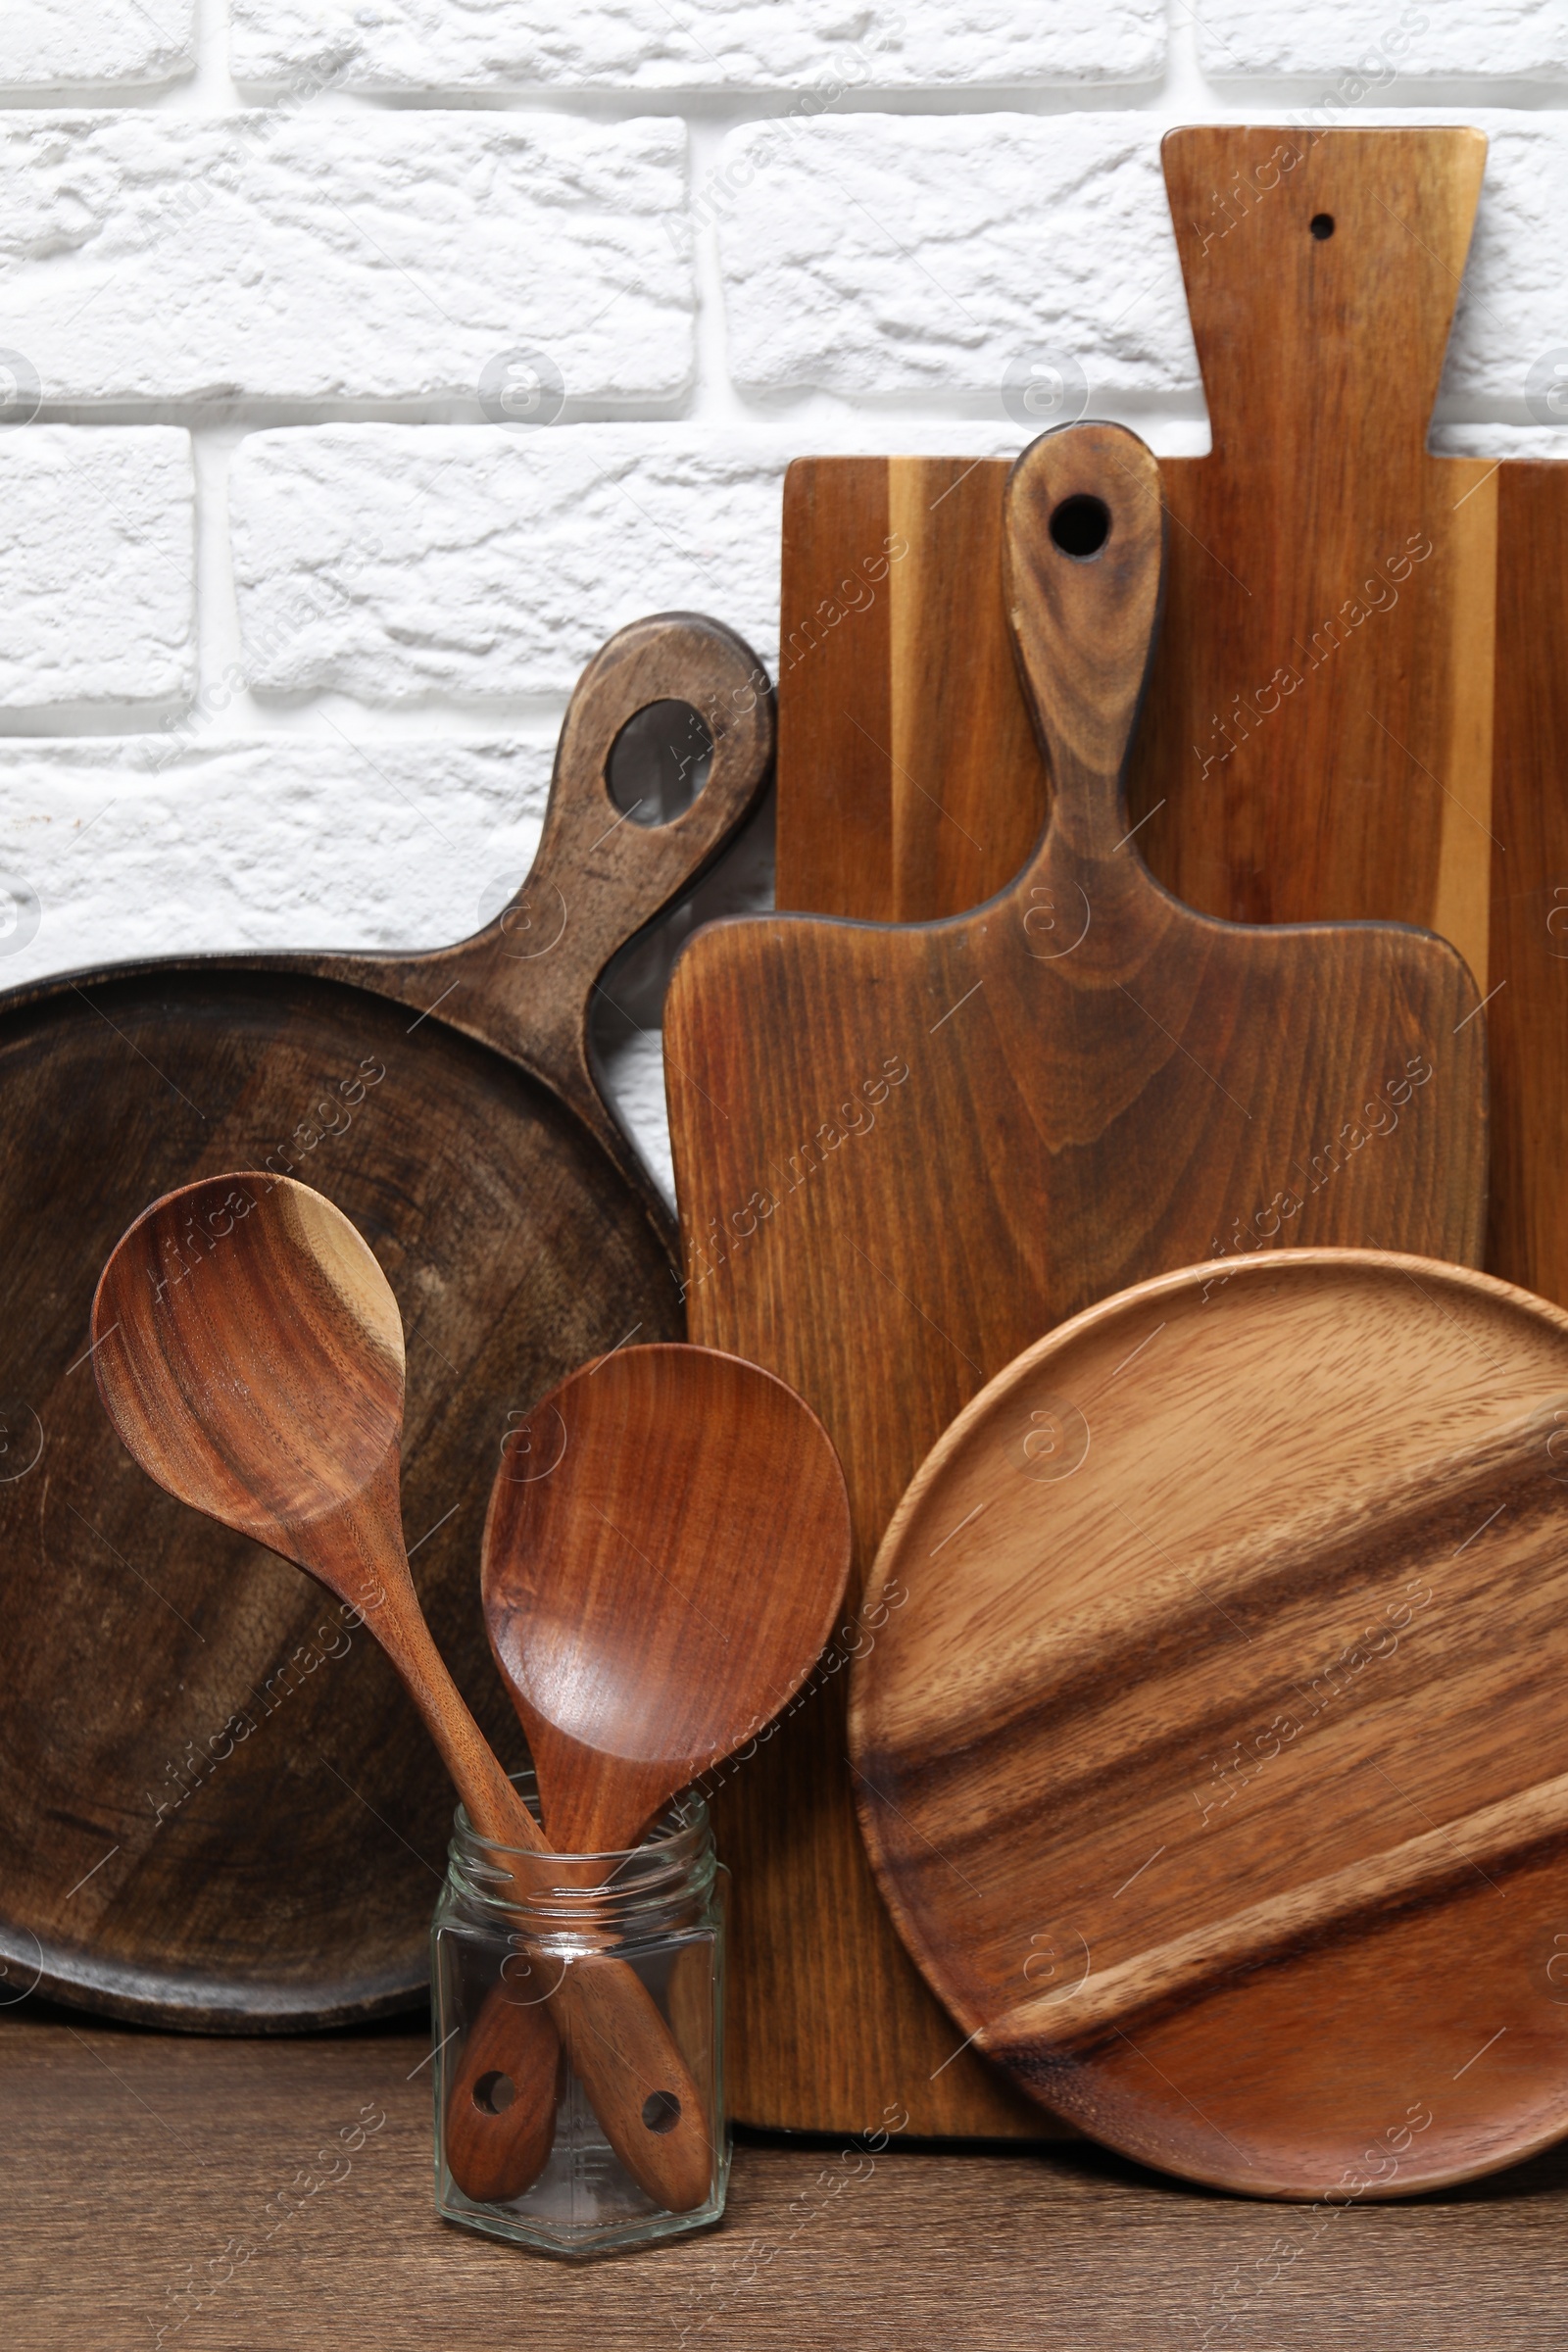 Photo of Different cutting boards and kitchen utensils on wooden table near brick wall